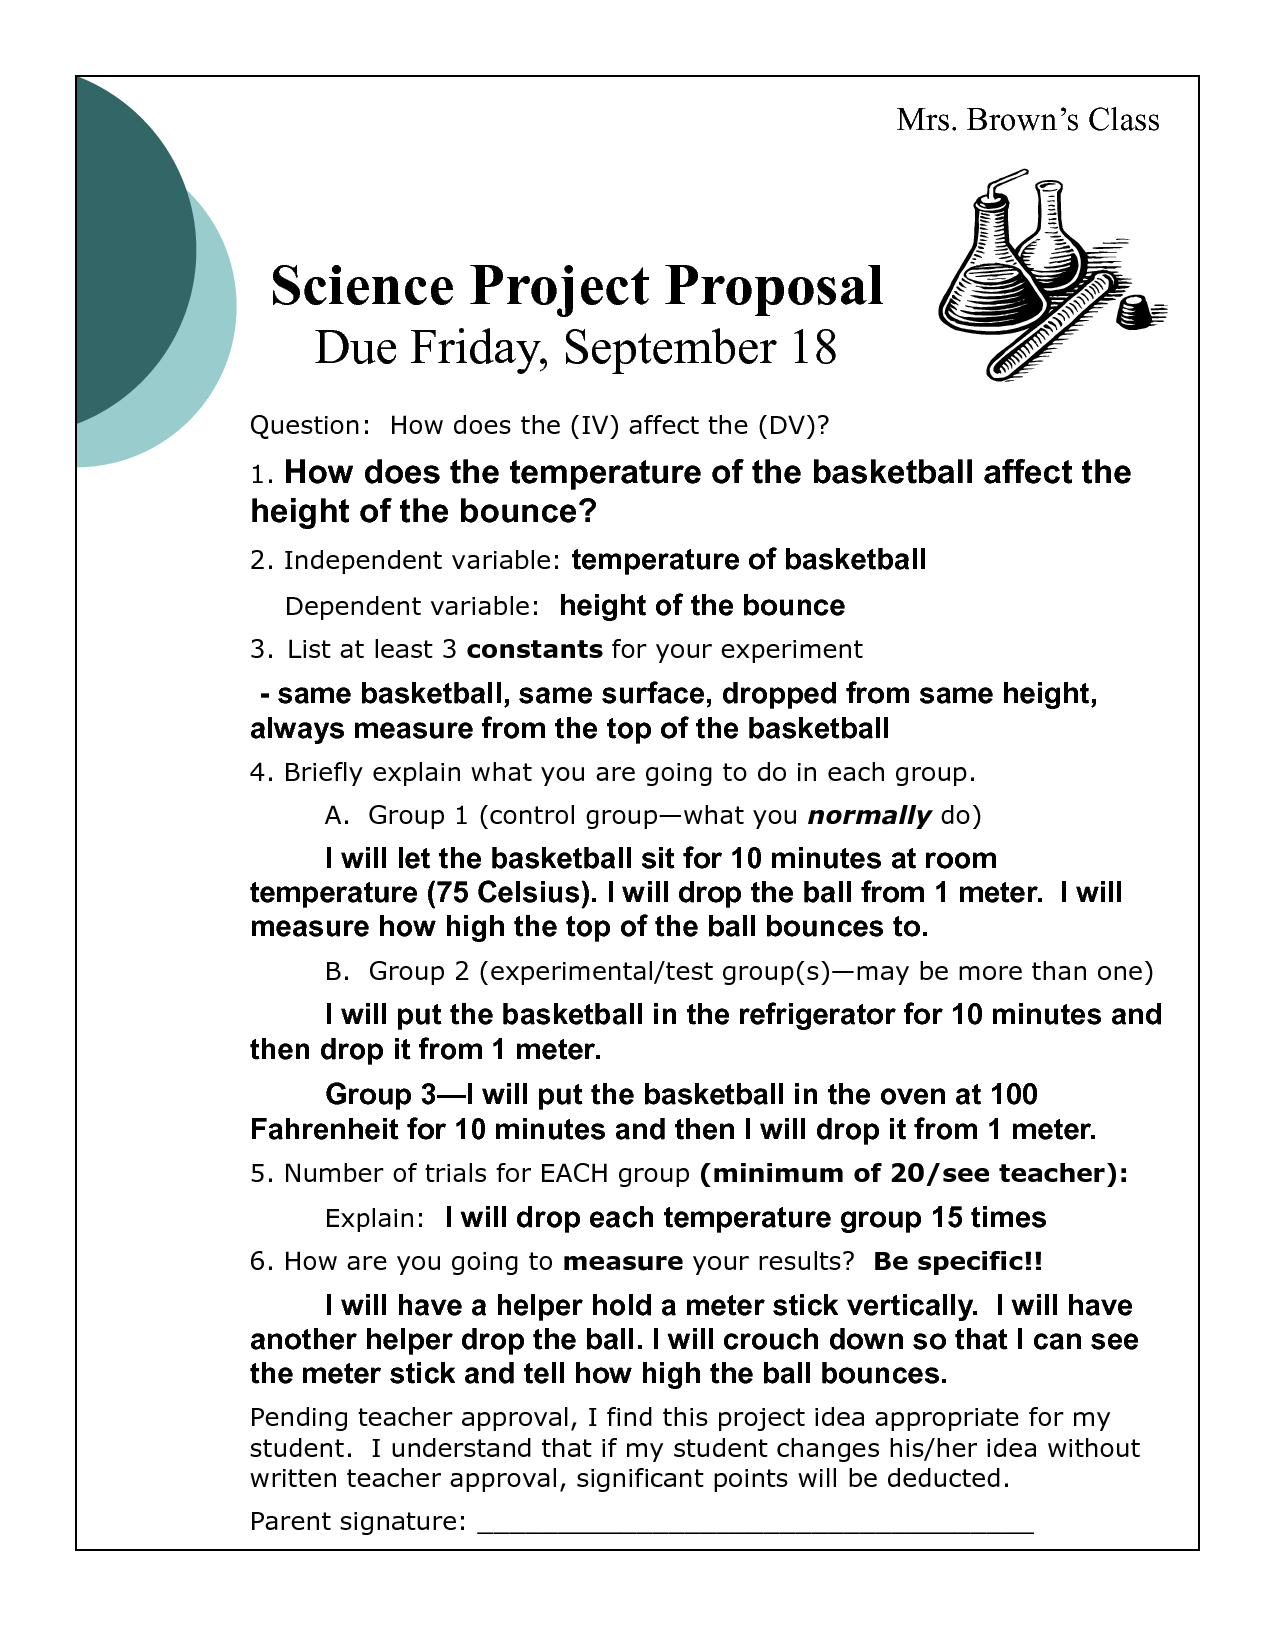 research topic proposal ideas